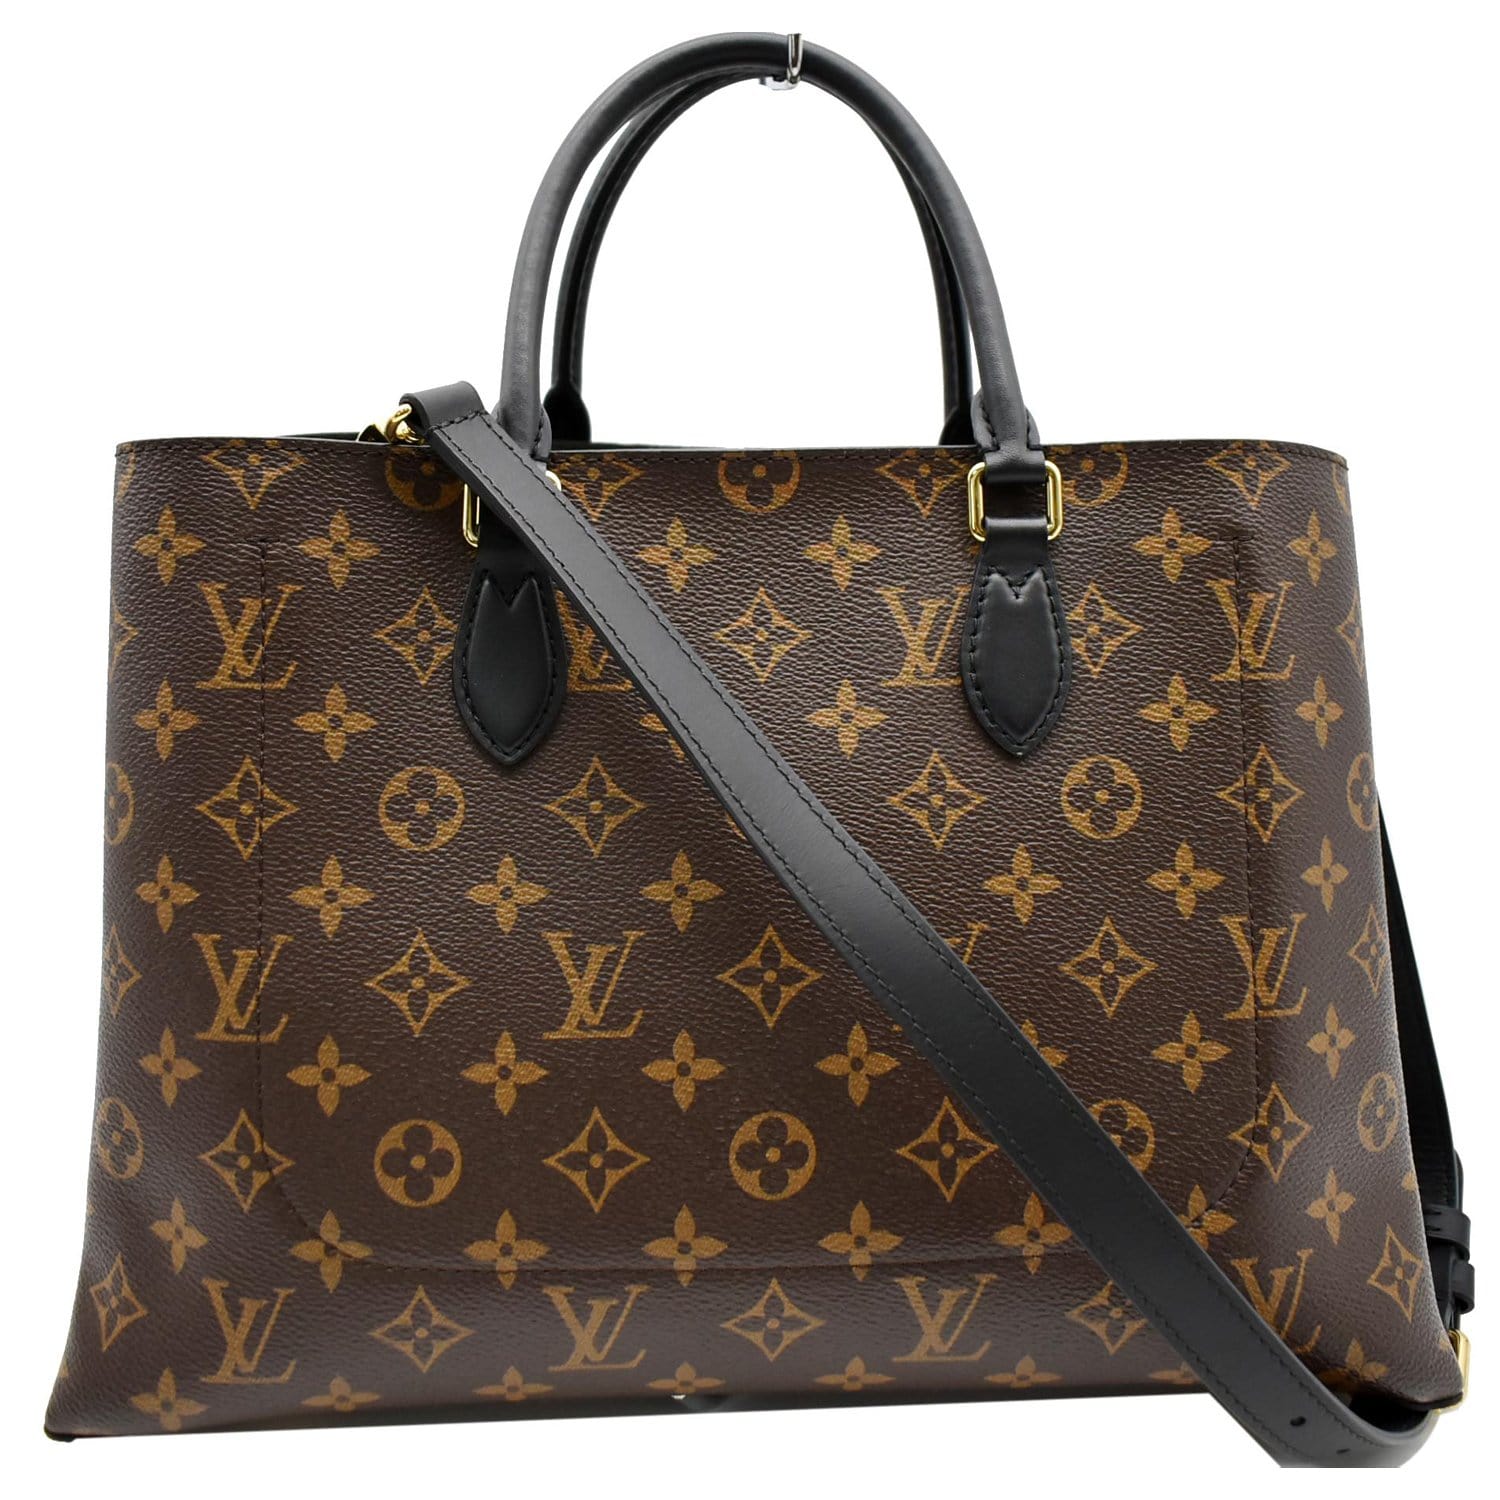 Customized Louis Vuitton Plat Moody Minnie Tote bag in brown monogram  canvas